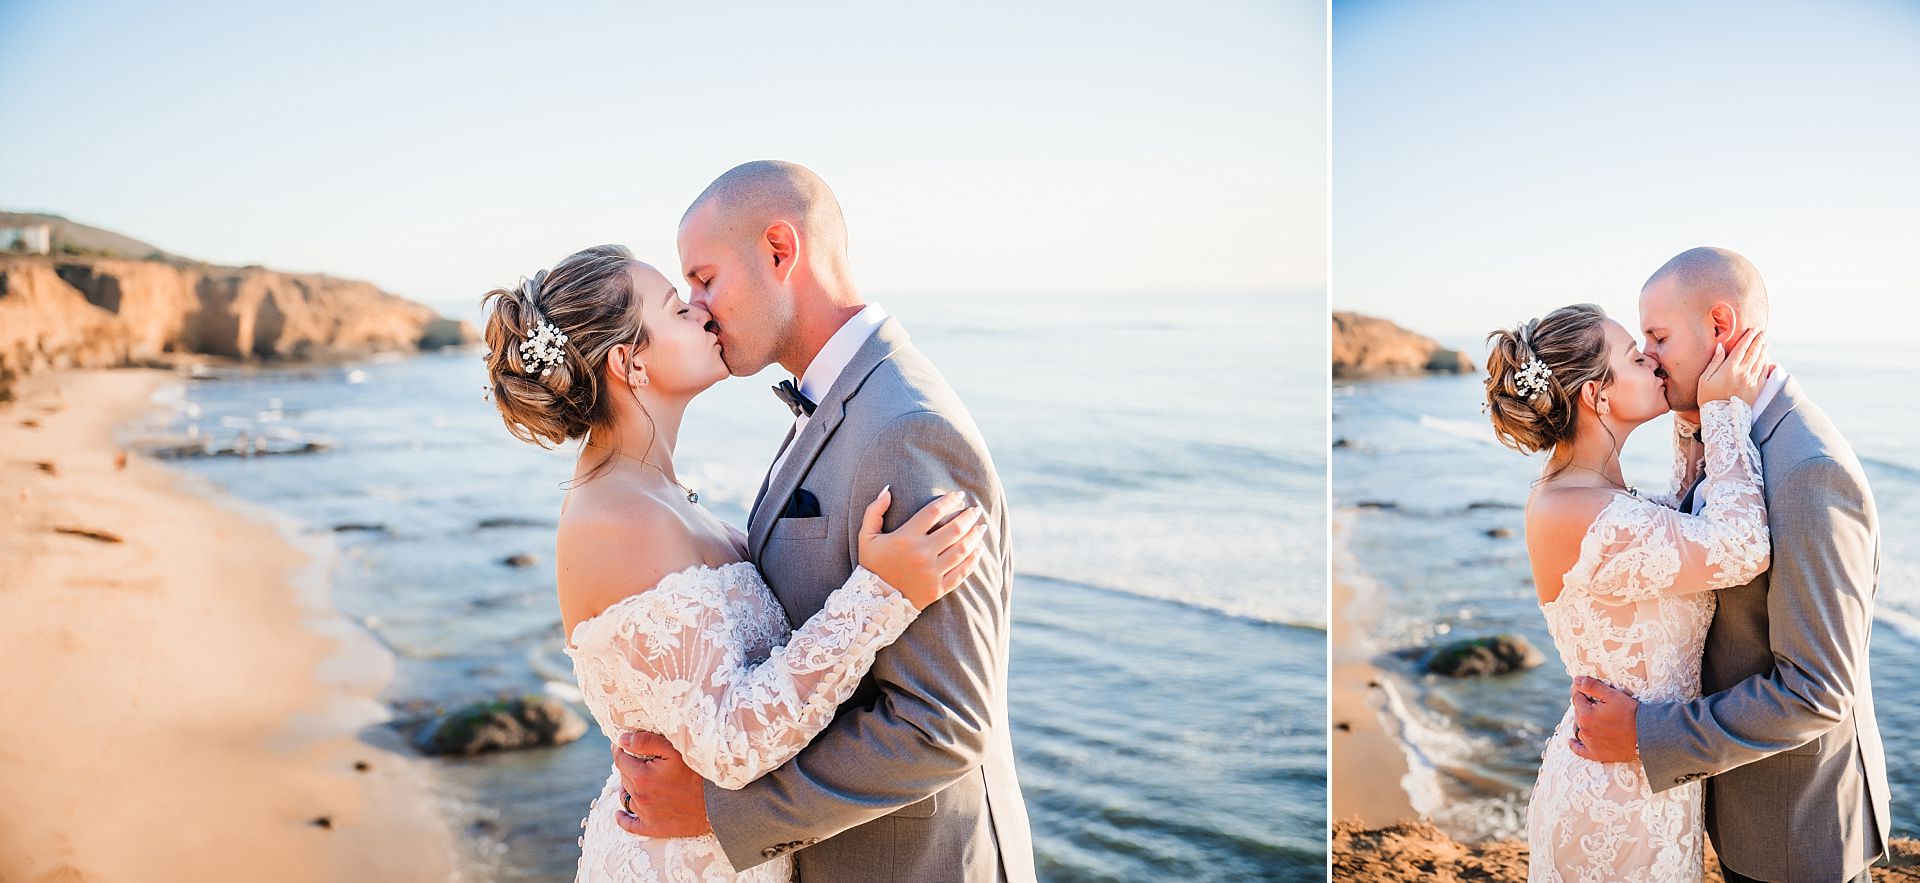 A couple in wedding attire share a kiss at an intimate Sunset Cliffs San Diego wedding